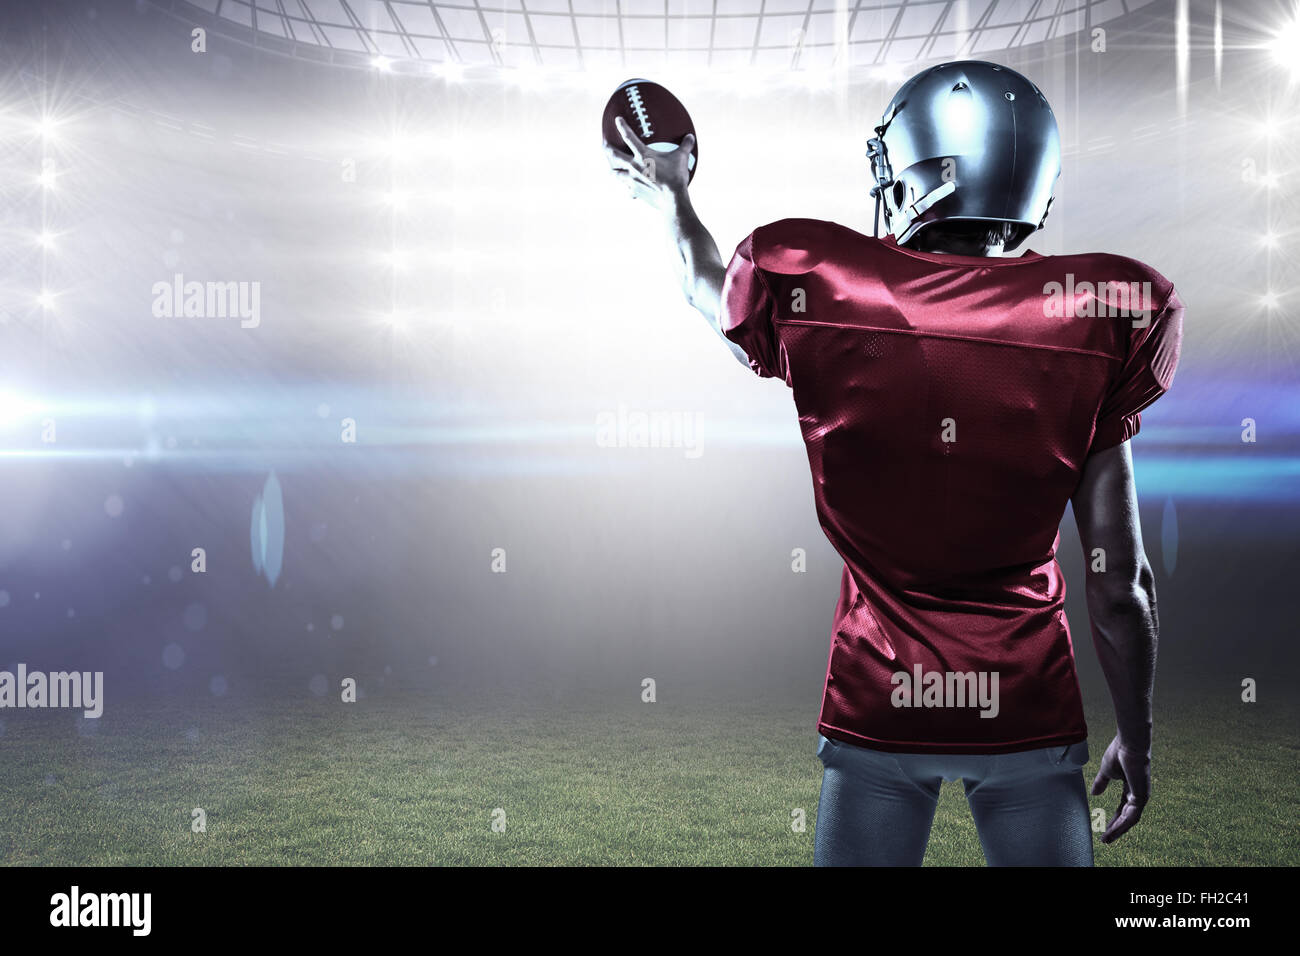 Composite image of rear view of sport player in red jersey holding ball Stock Photo